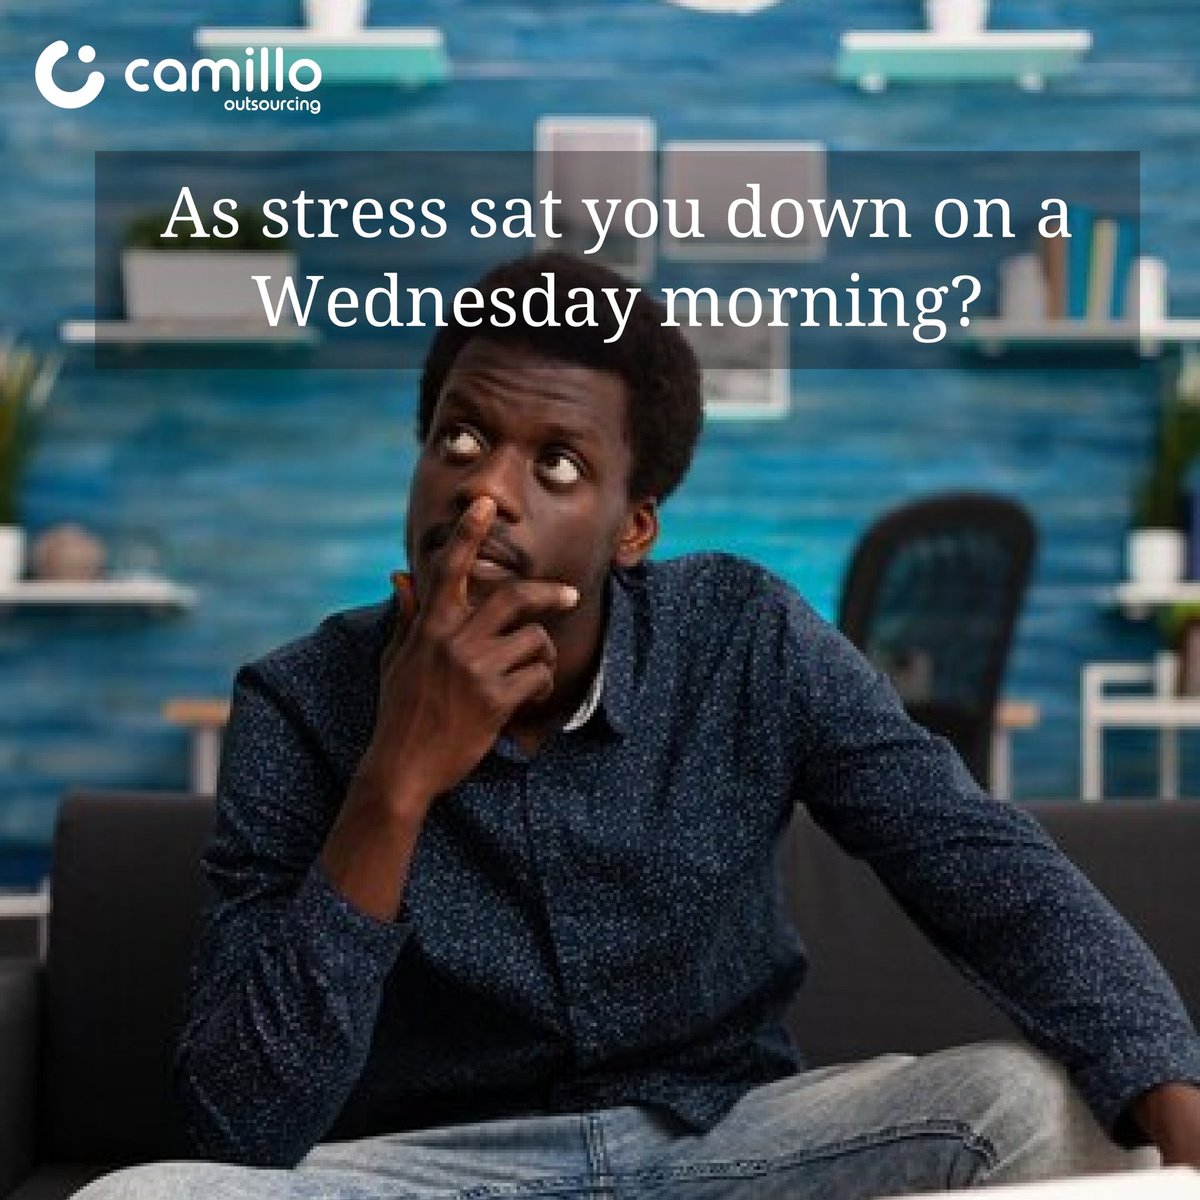 Are you already feeling stressed with work this morning.

Don't stress further just outsource it.
info@camillo.ng
0201-343-8060
0201-343-8061

#camillo #outsource #outsourcing #stressed #businesstrends #businessowners
#workflow #outsourceit